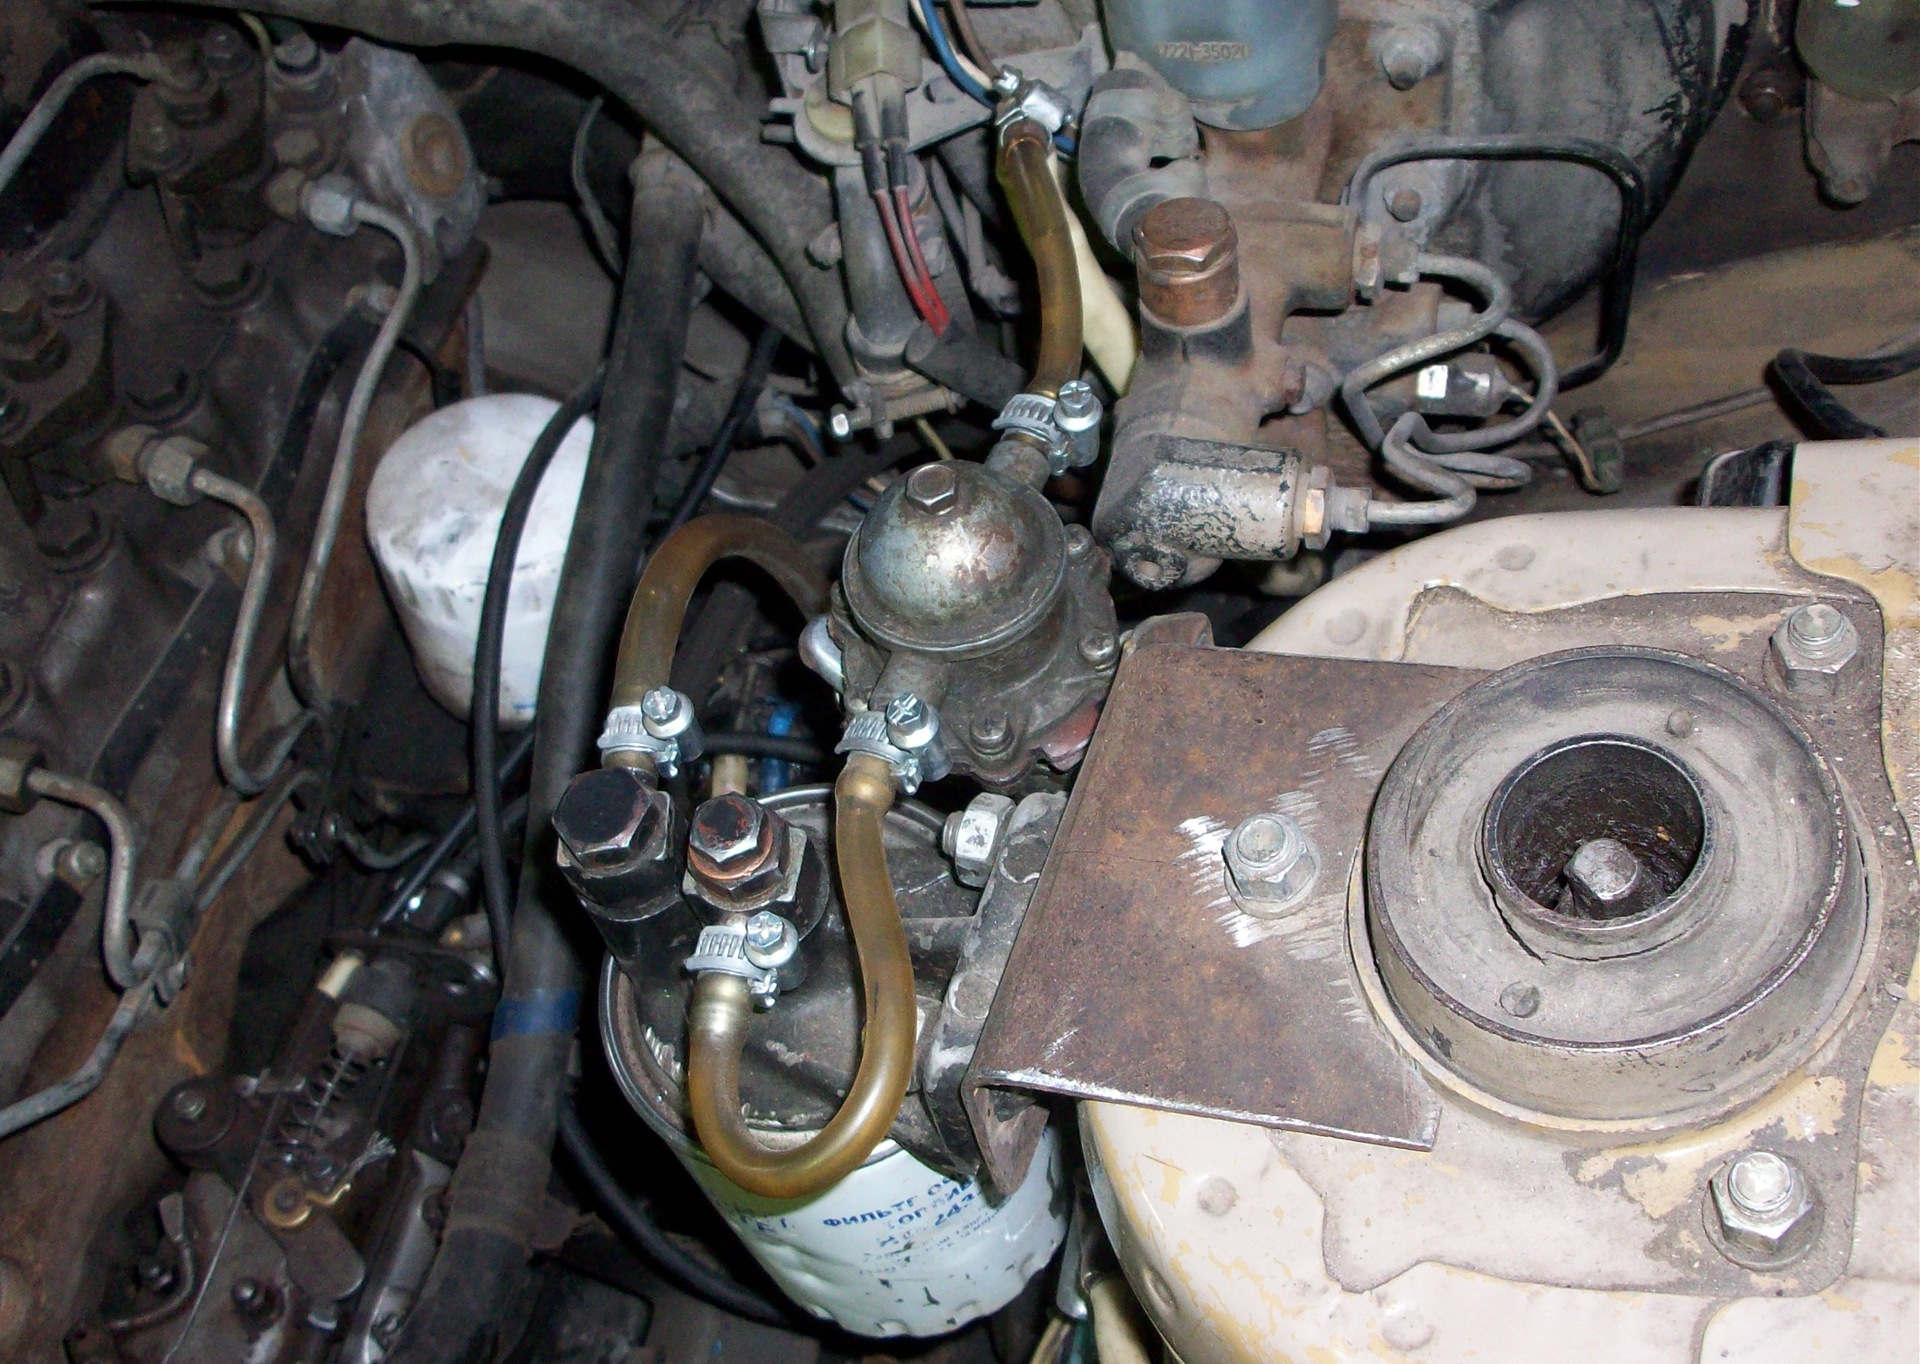 installing fuel filter and pumping - Toyota Cressida 1979